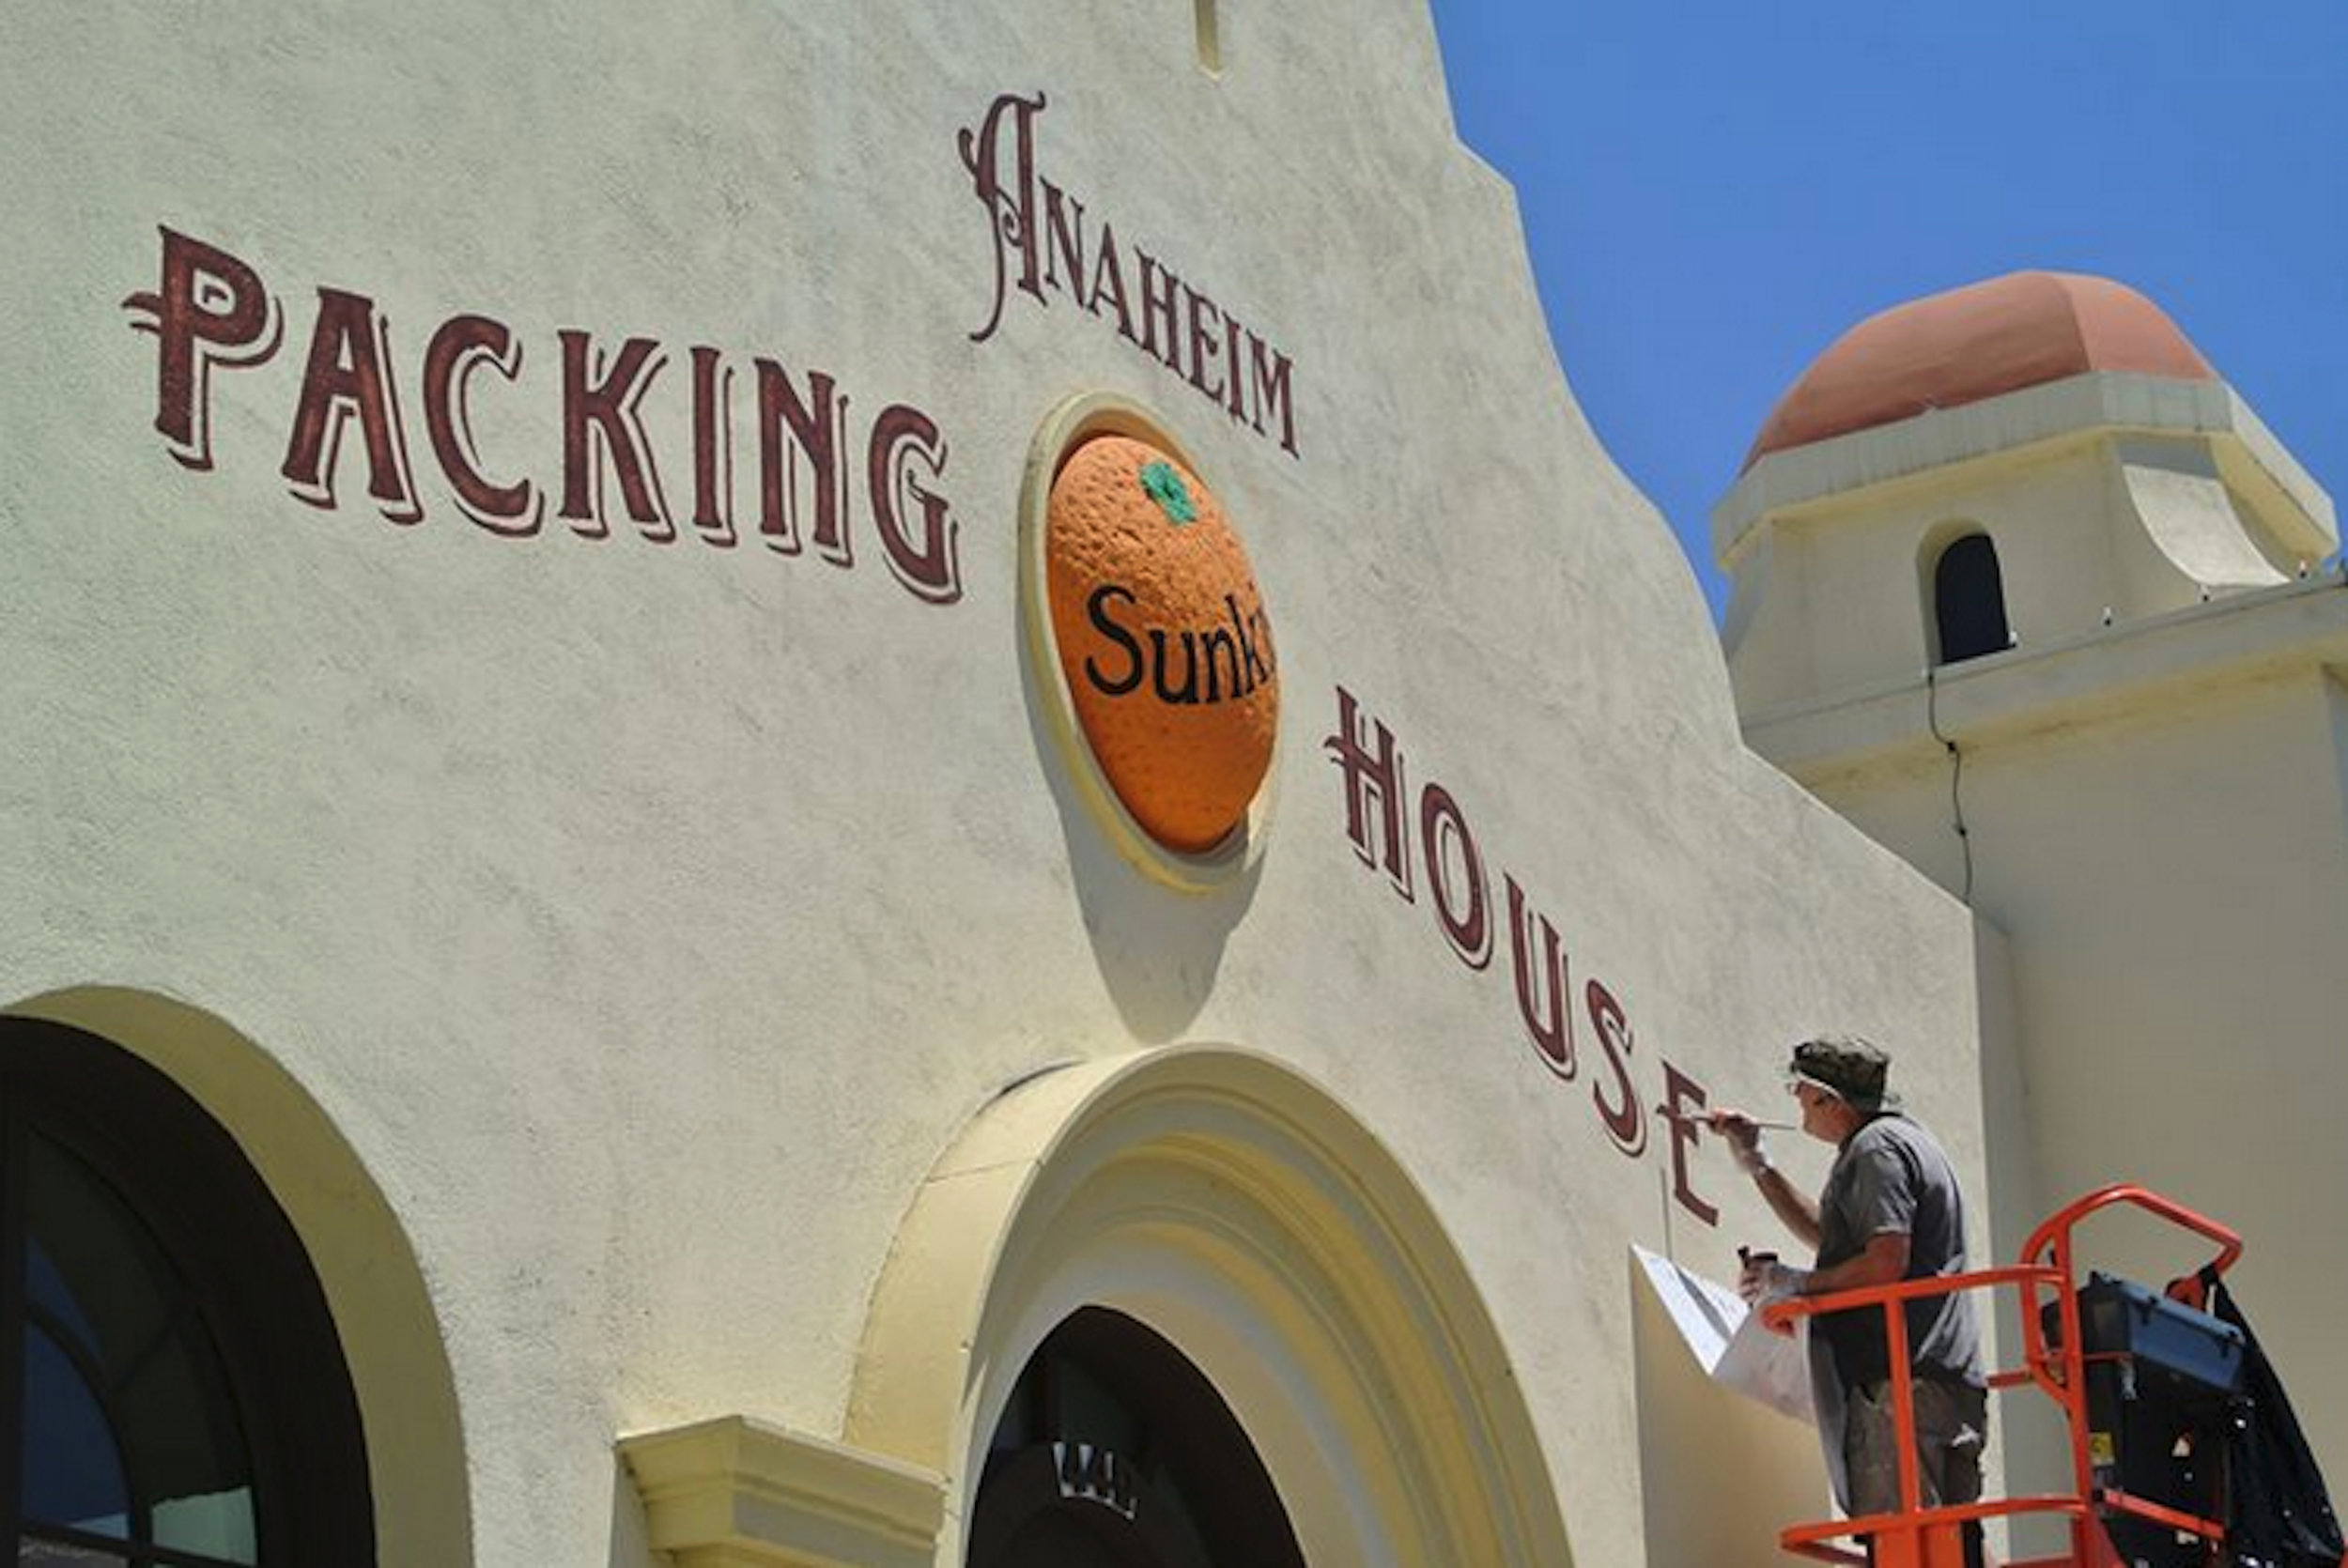 Anaheim Packing House hand painted graphic mural - sign painter working